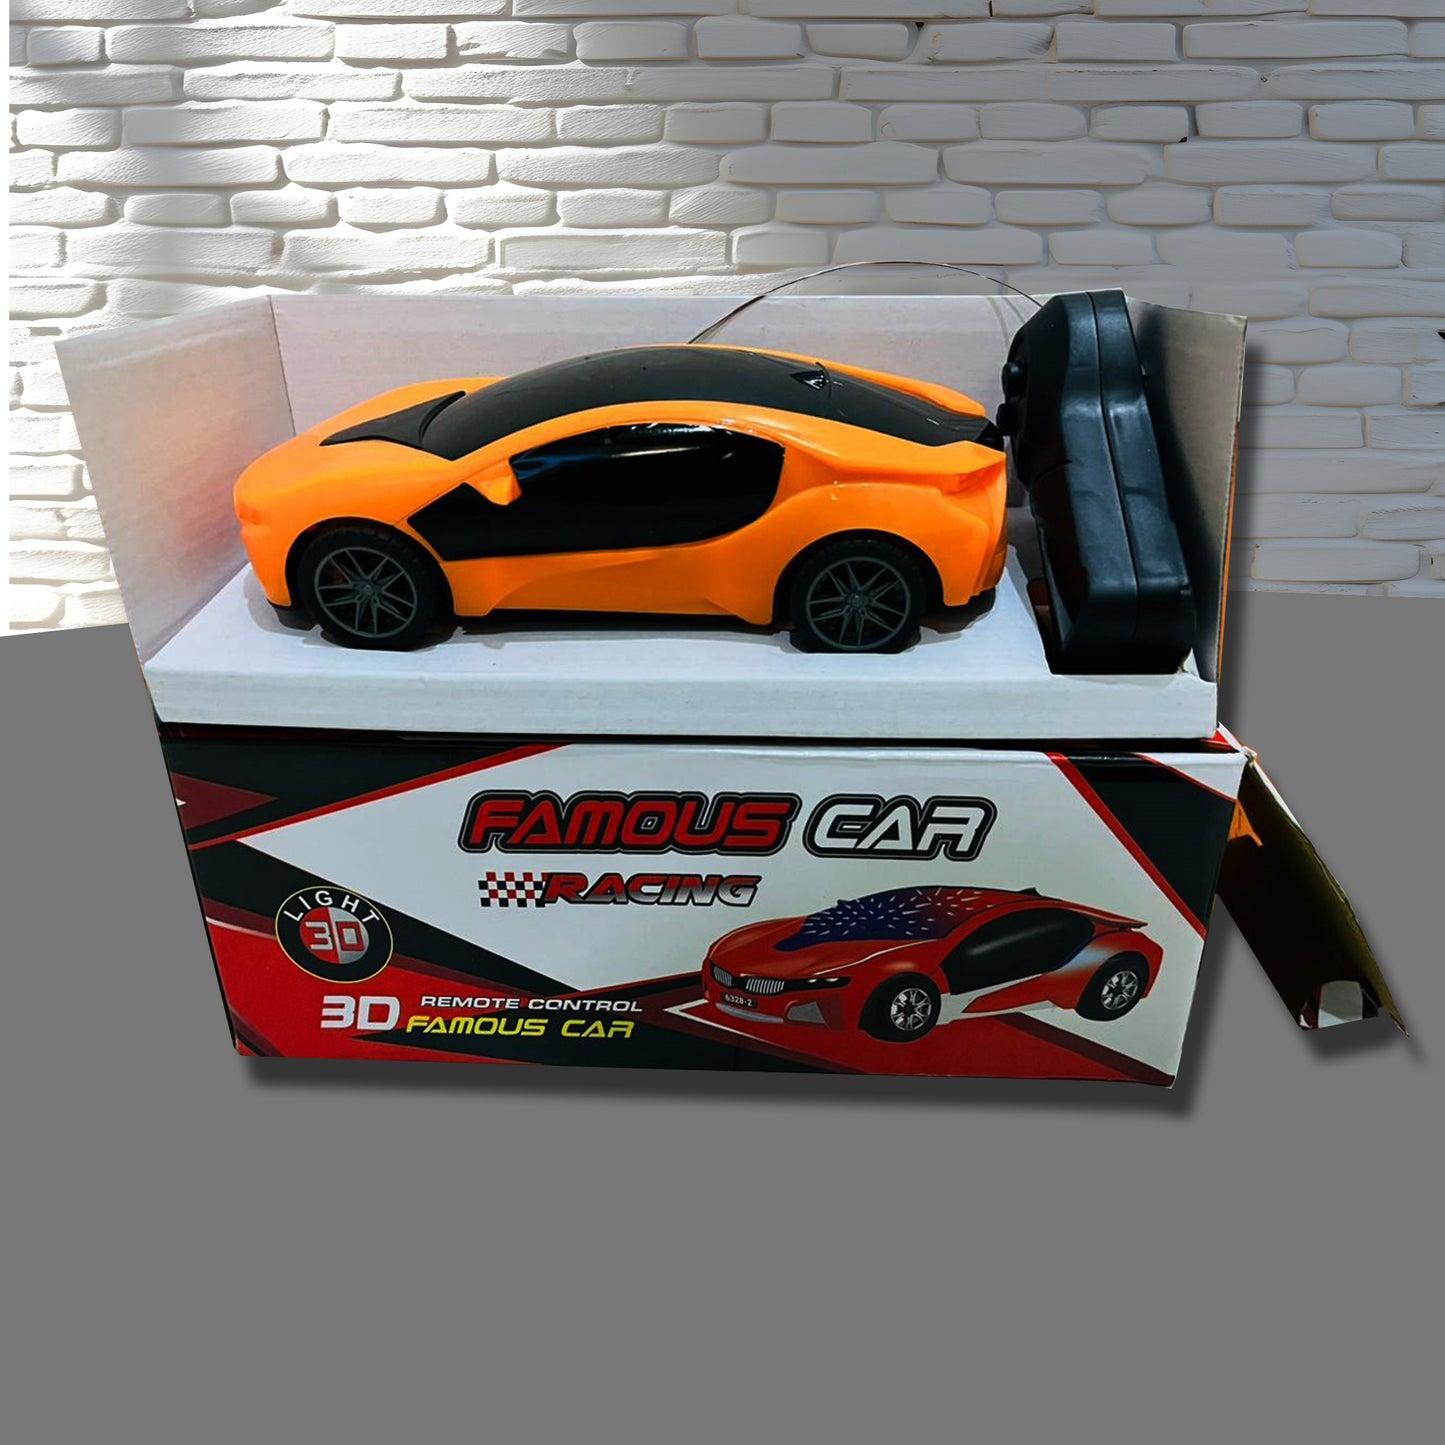 3D Lights Famous Remote Control High Speed Racing Car